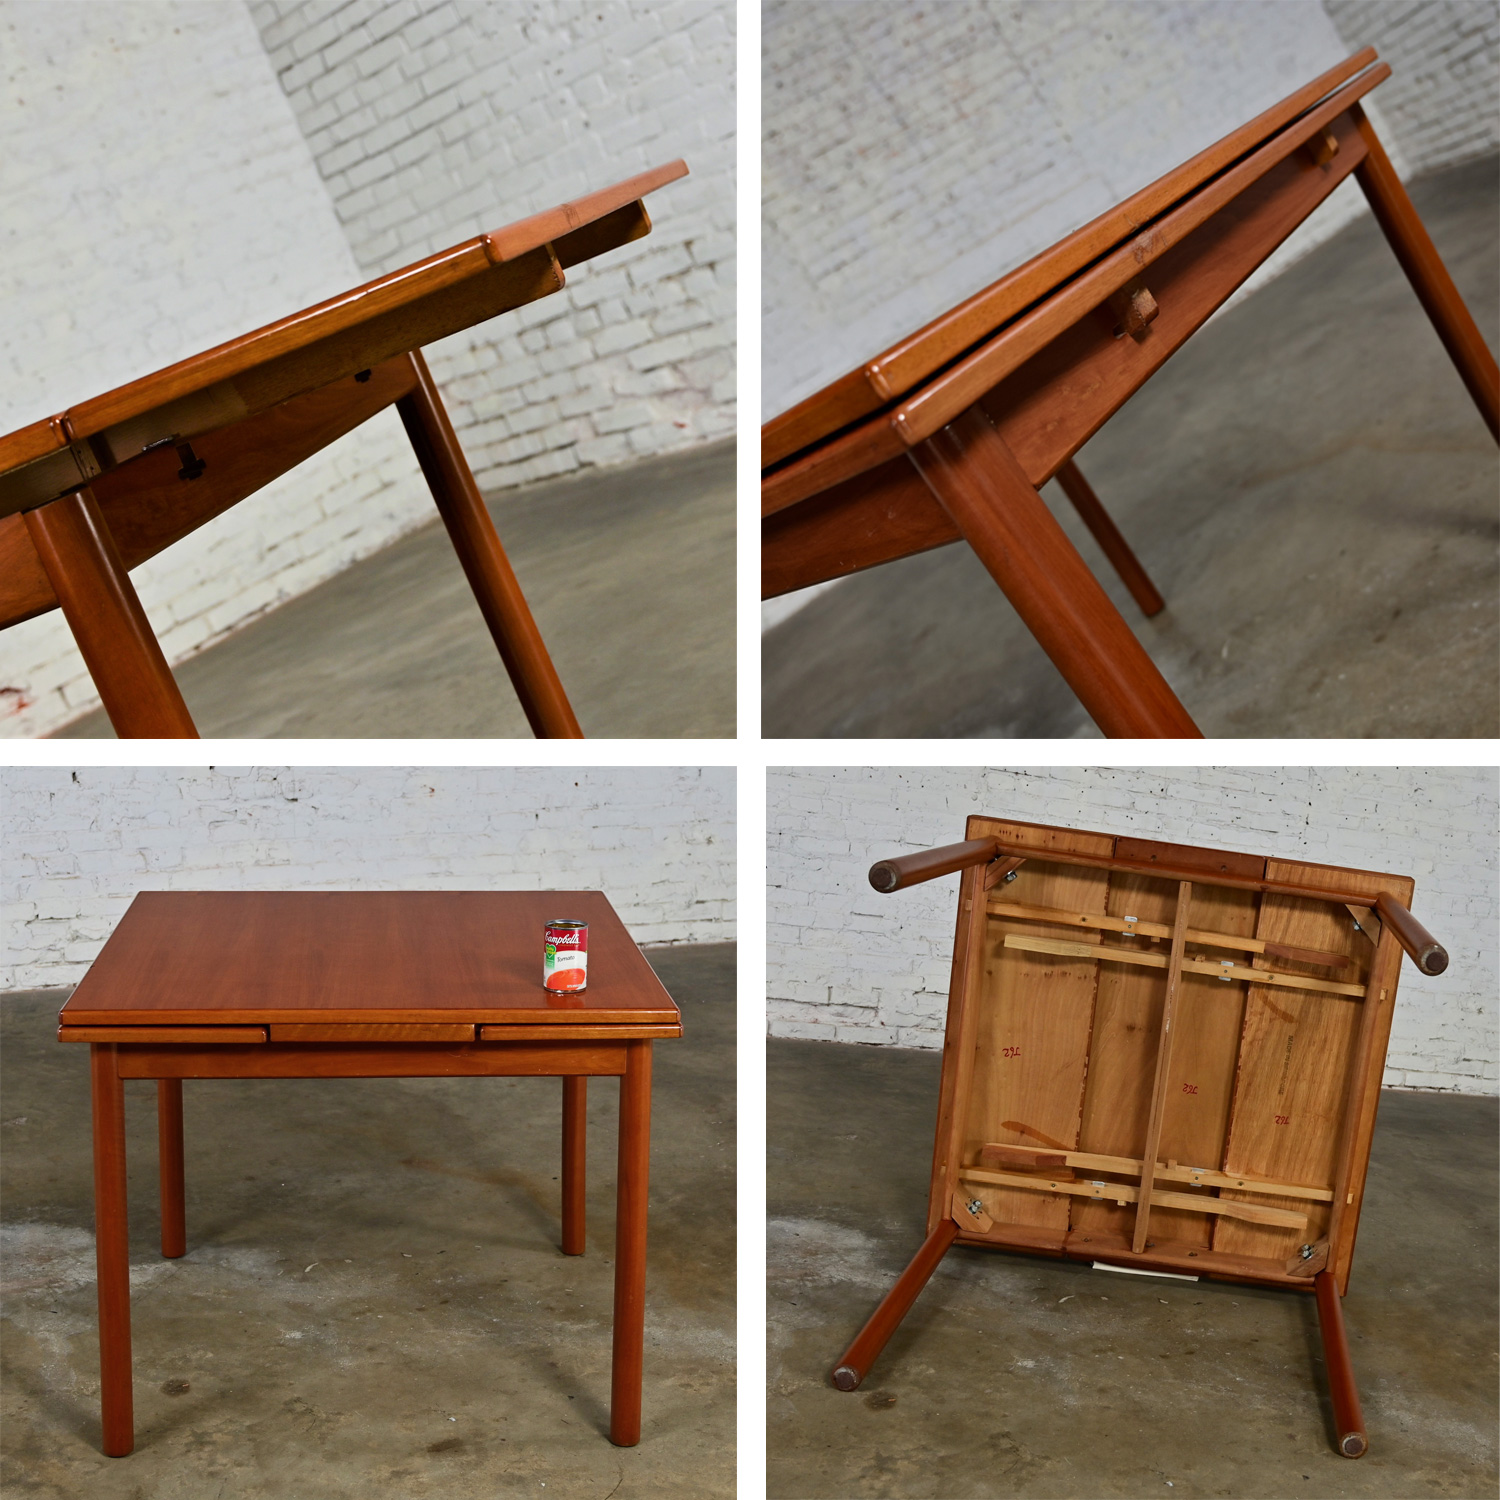 Mid to Late 20th Century Scandinavian Modern Style Teak Square Extension Dining Table Made in Singapore